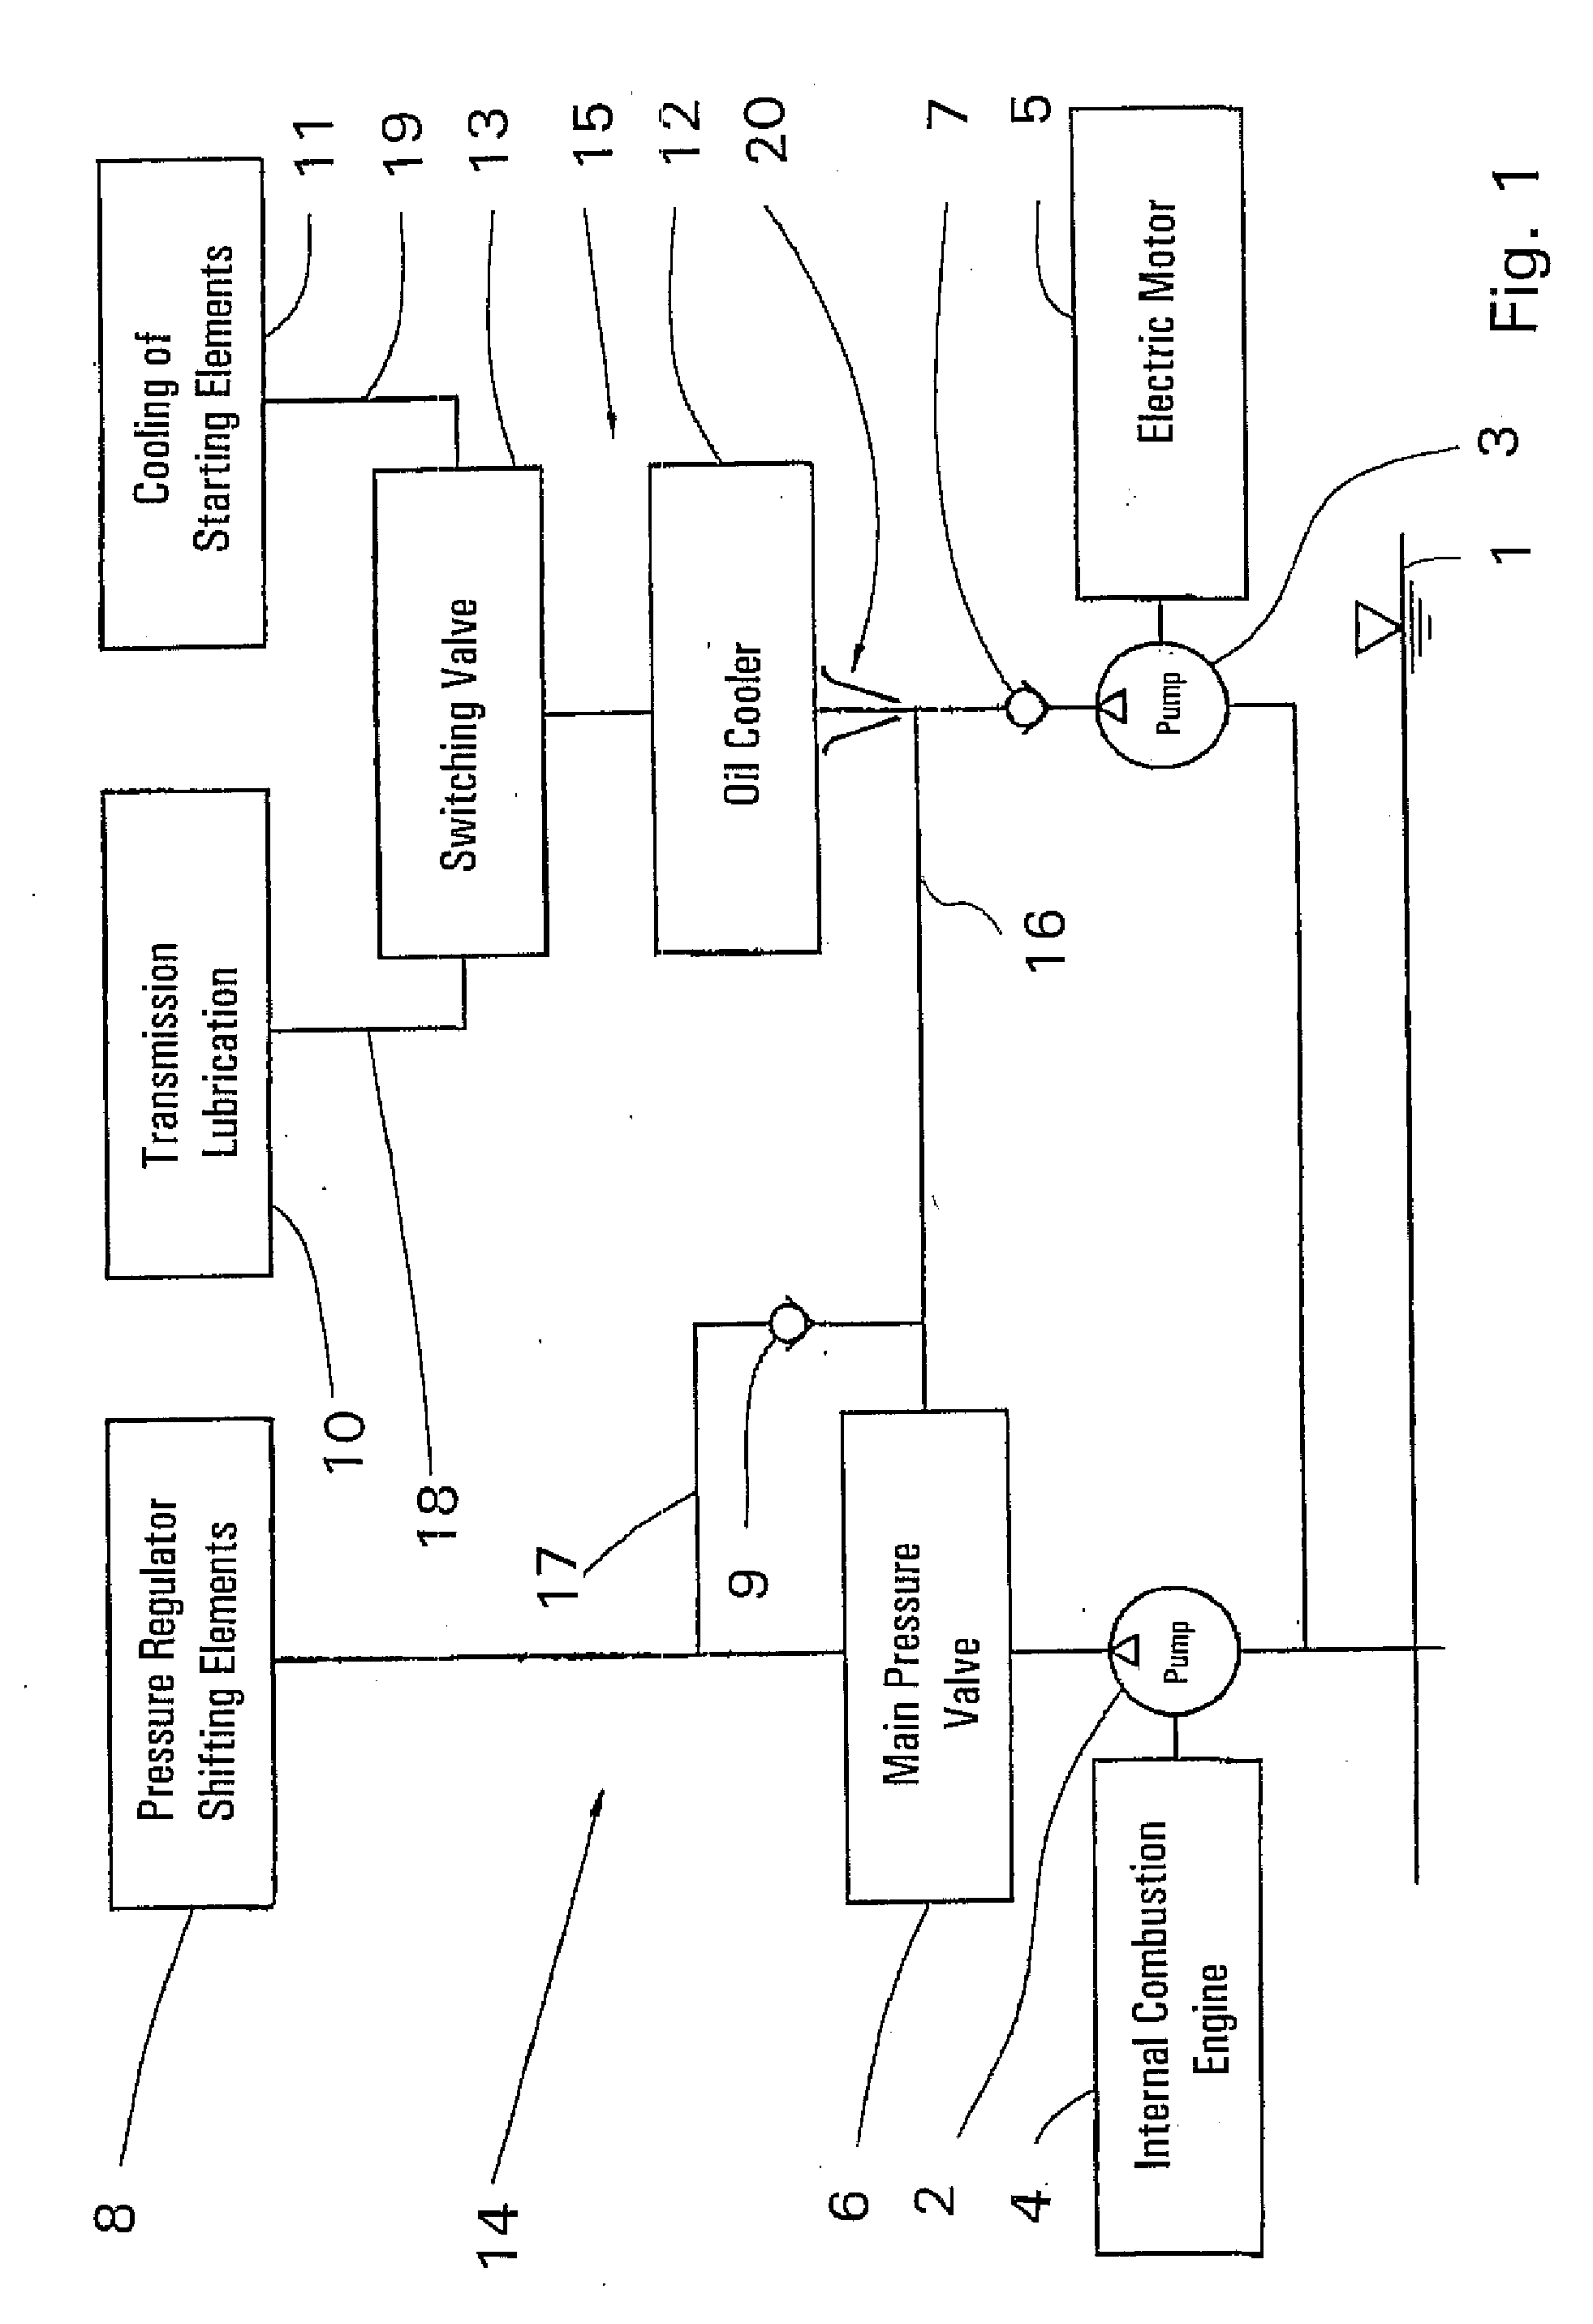 Method and device for controlling the oil supply of an automatic gearbox and a starting element